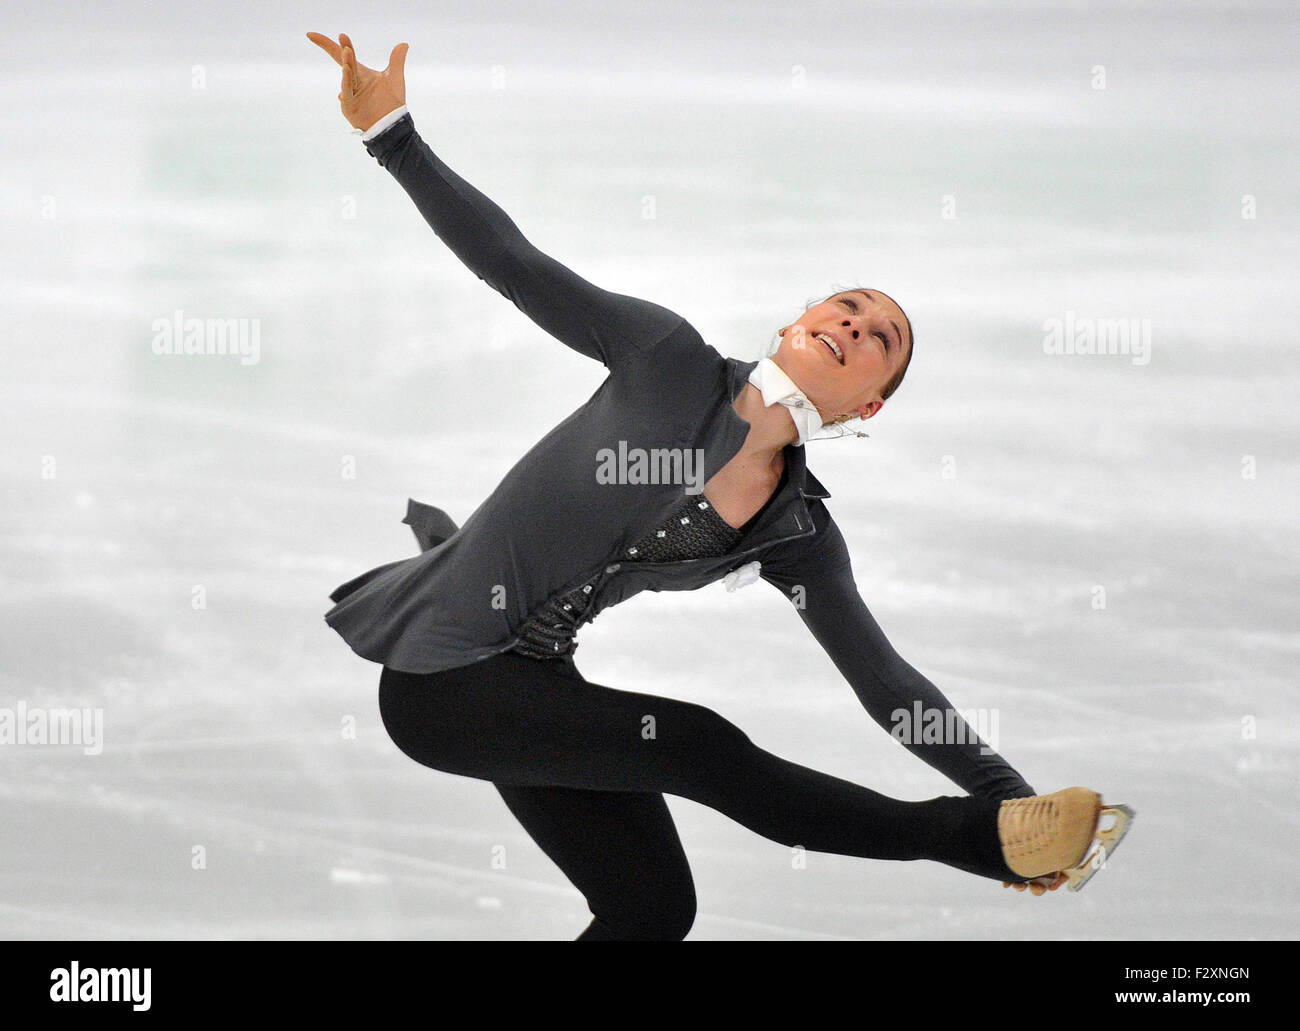 Russian figure skater Alena Leonova in action during her short program at the Nebelhorn Trophy figure skating competition in Oberstdorf, Germany, 25 September 2015. Photo: STEFAN PUCHNER/dpa Stock Photo